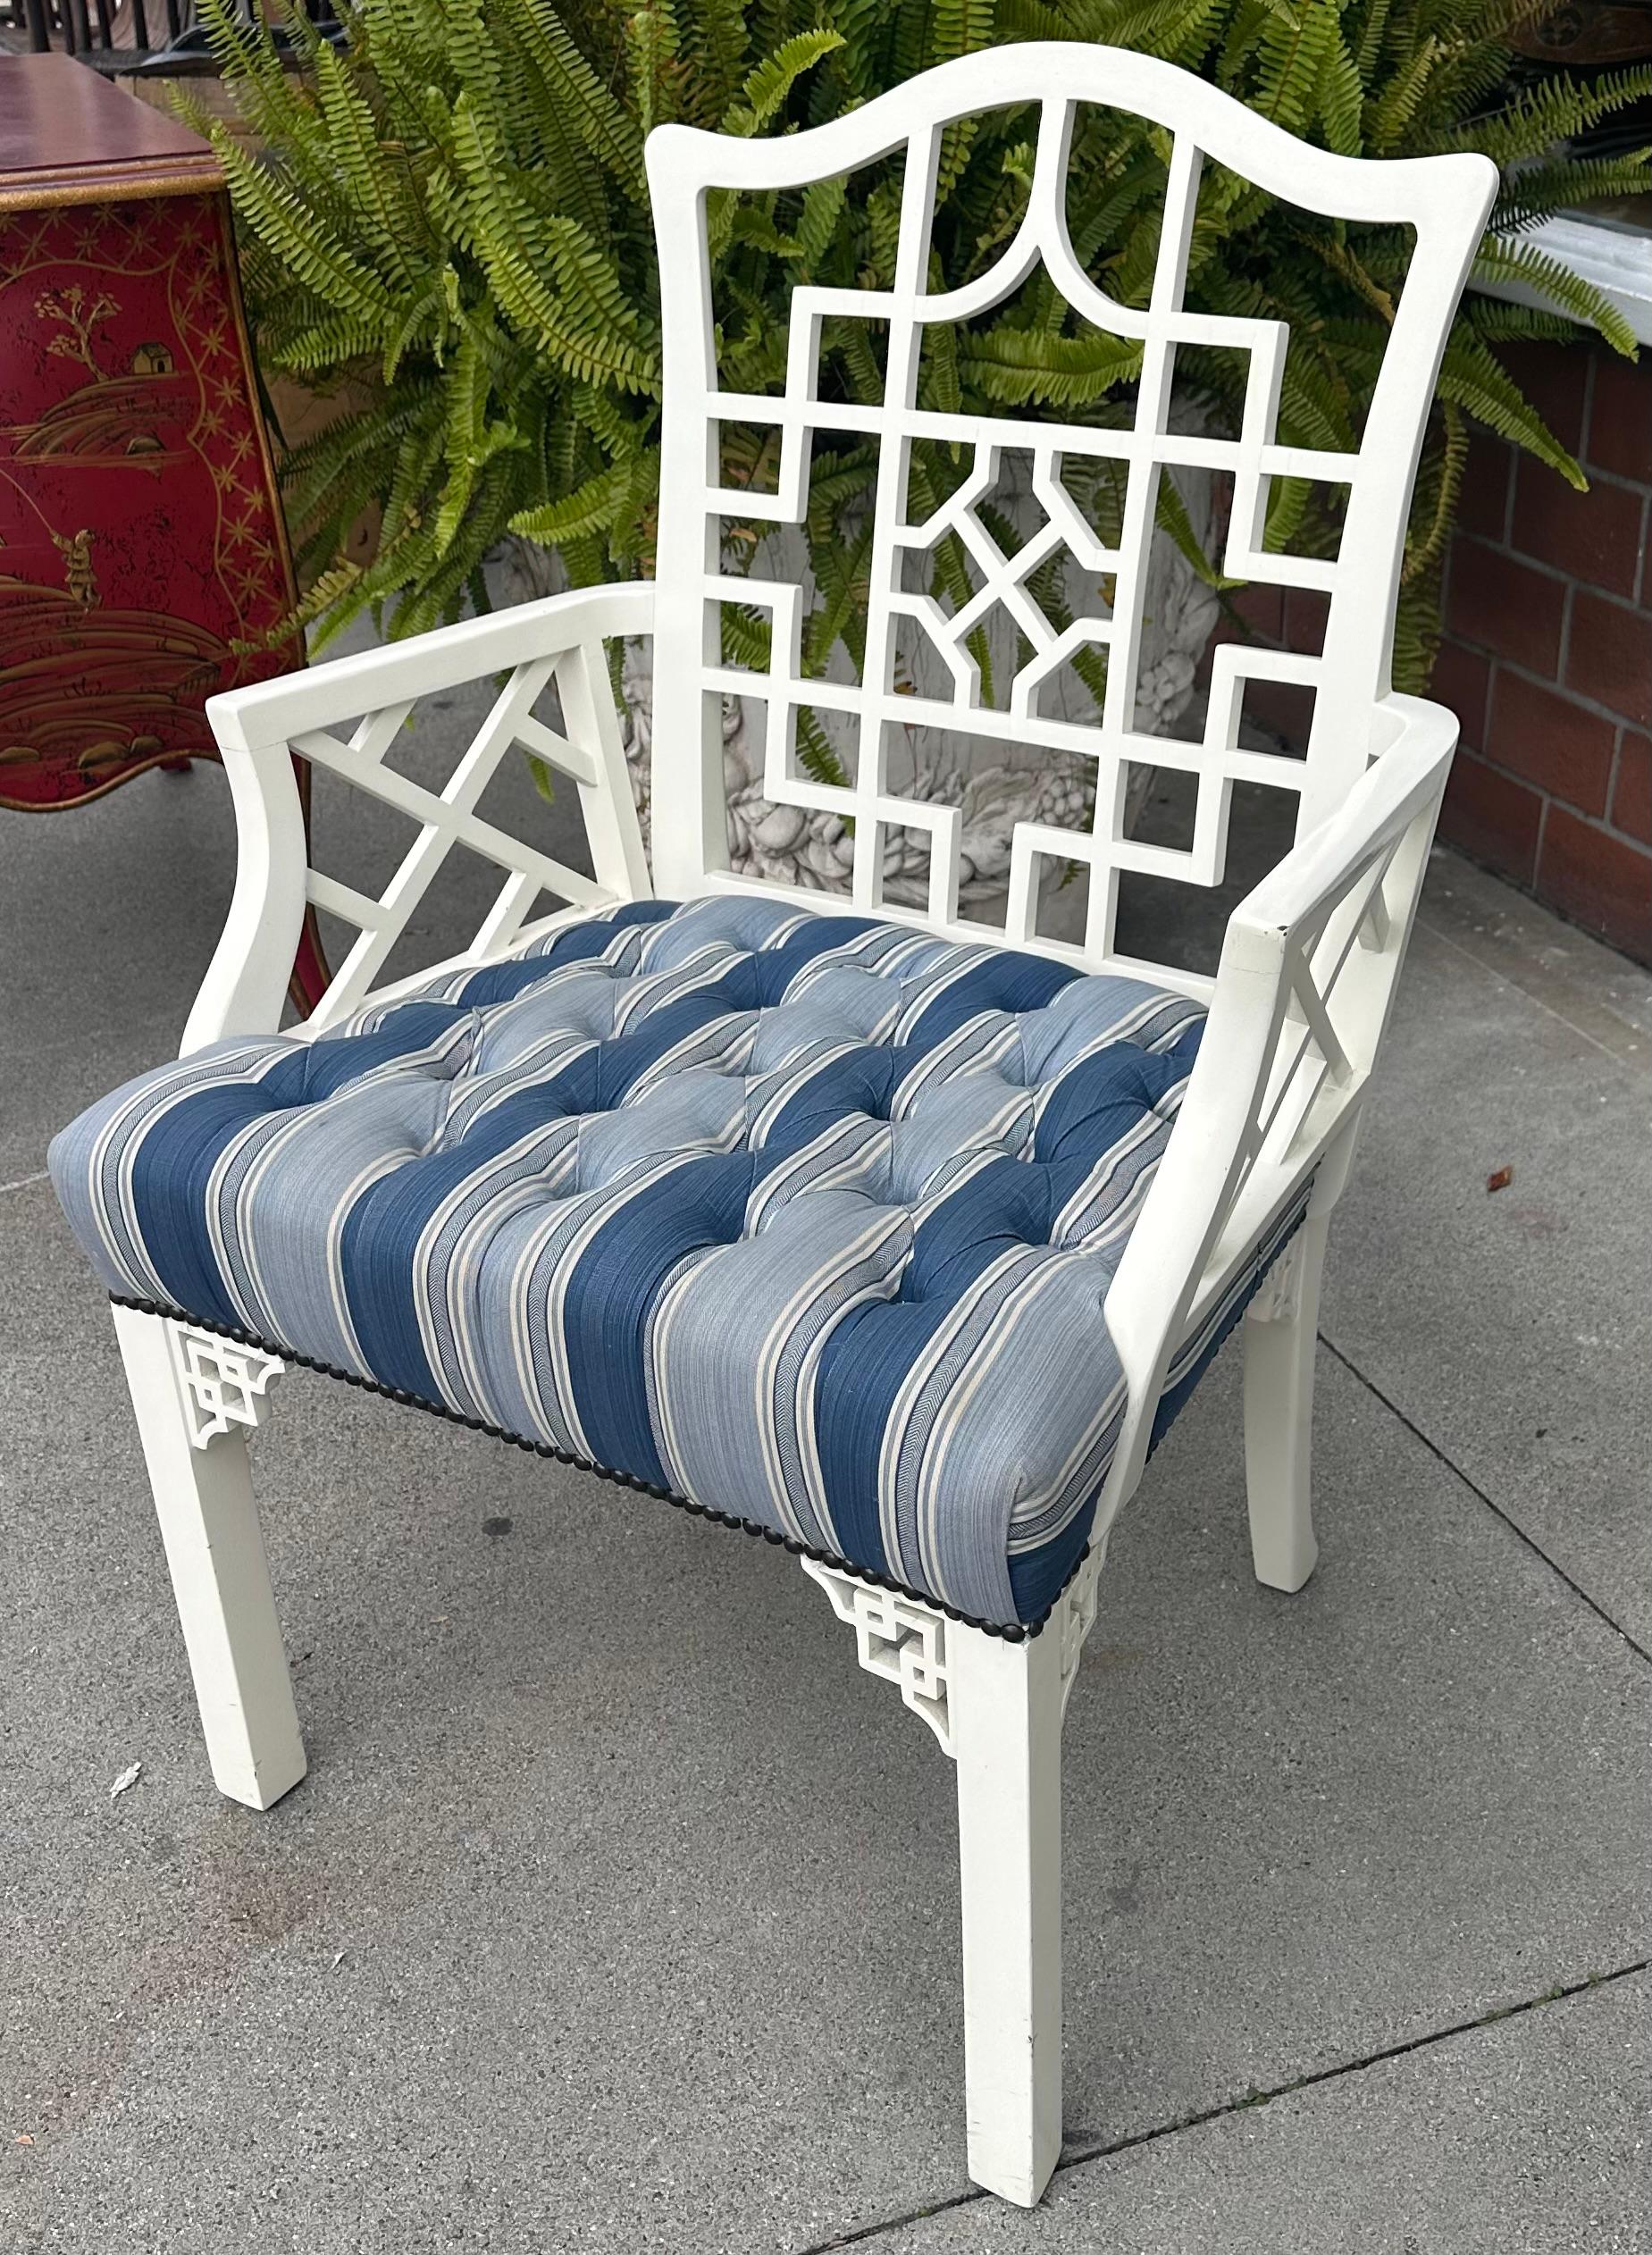 Hollywood Regency Chinese Chippendale White Lacquer Arm Chair. Beautifully upholstered with tufted blue & white striped designer fabric.